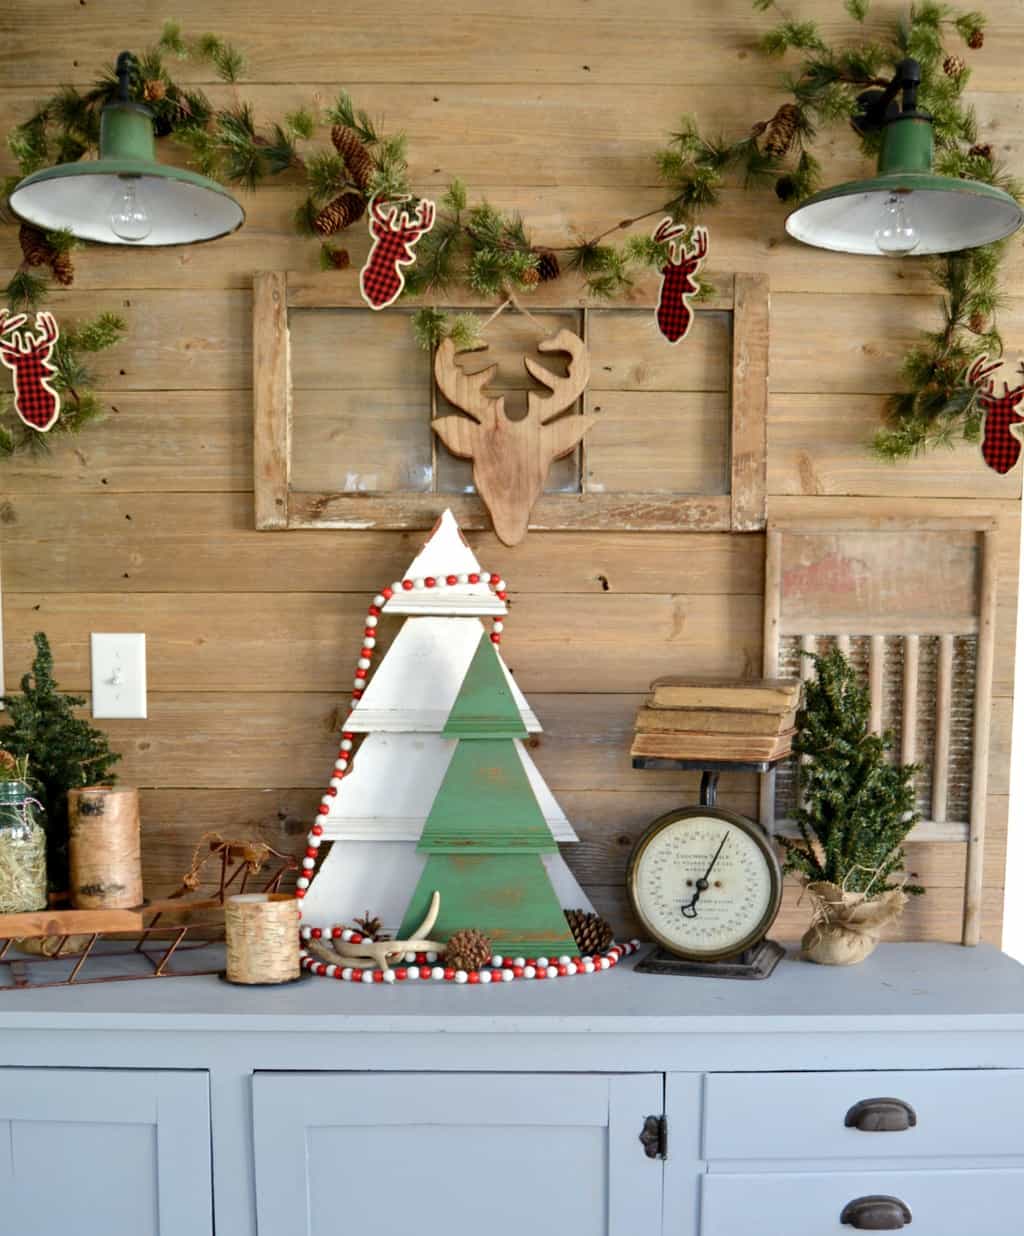 DIY Rustic Wall Christmas Tree To Add Character & Charm To Your Home